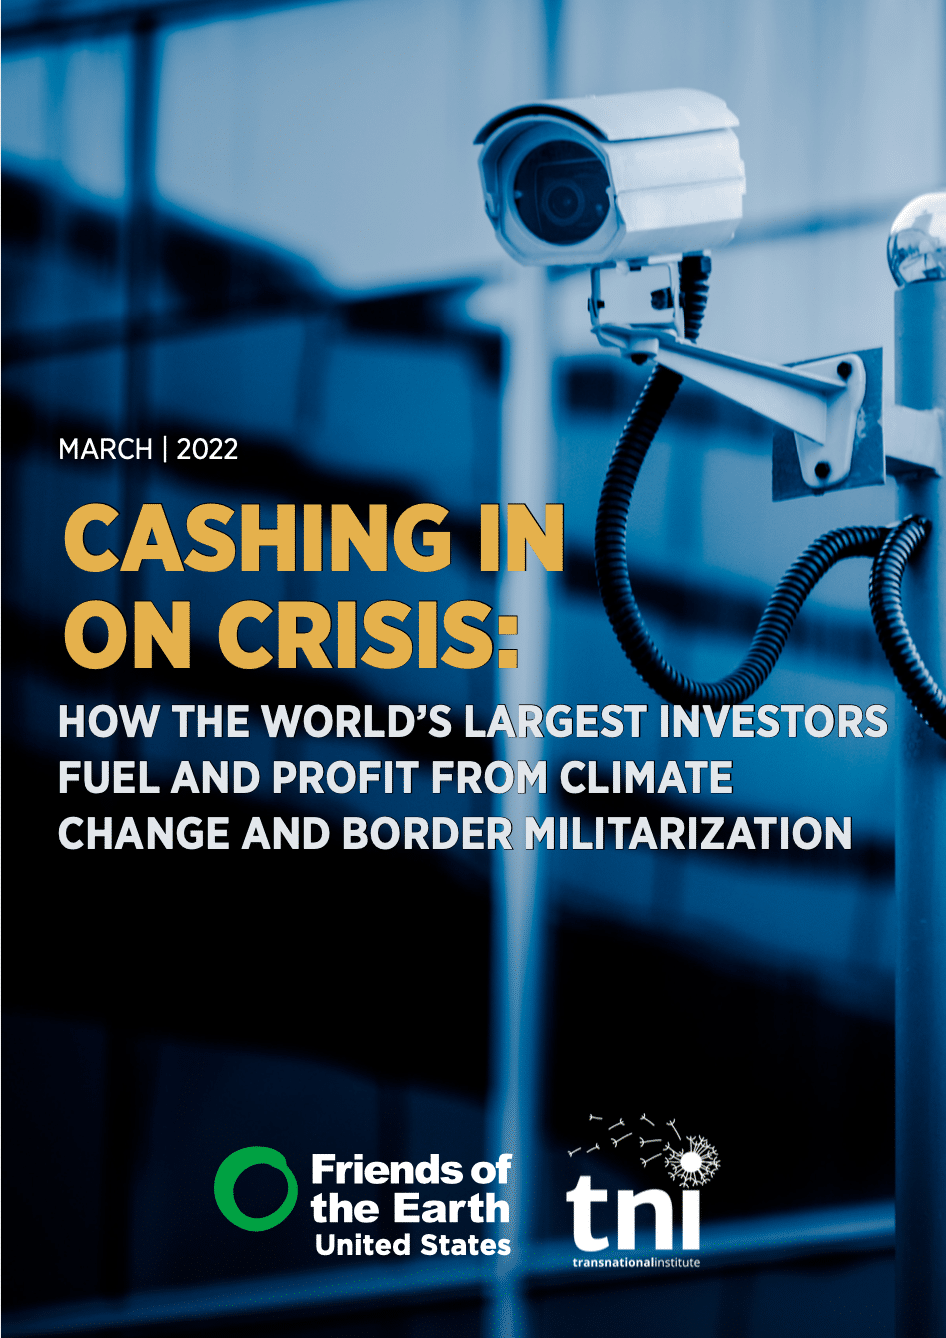 Cashing in on Crisis: How the World’s Largest Investors Fuel and Profit from Climate Change and Border Militarization